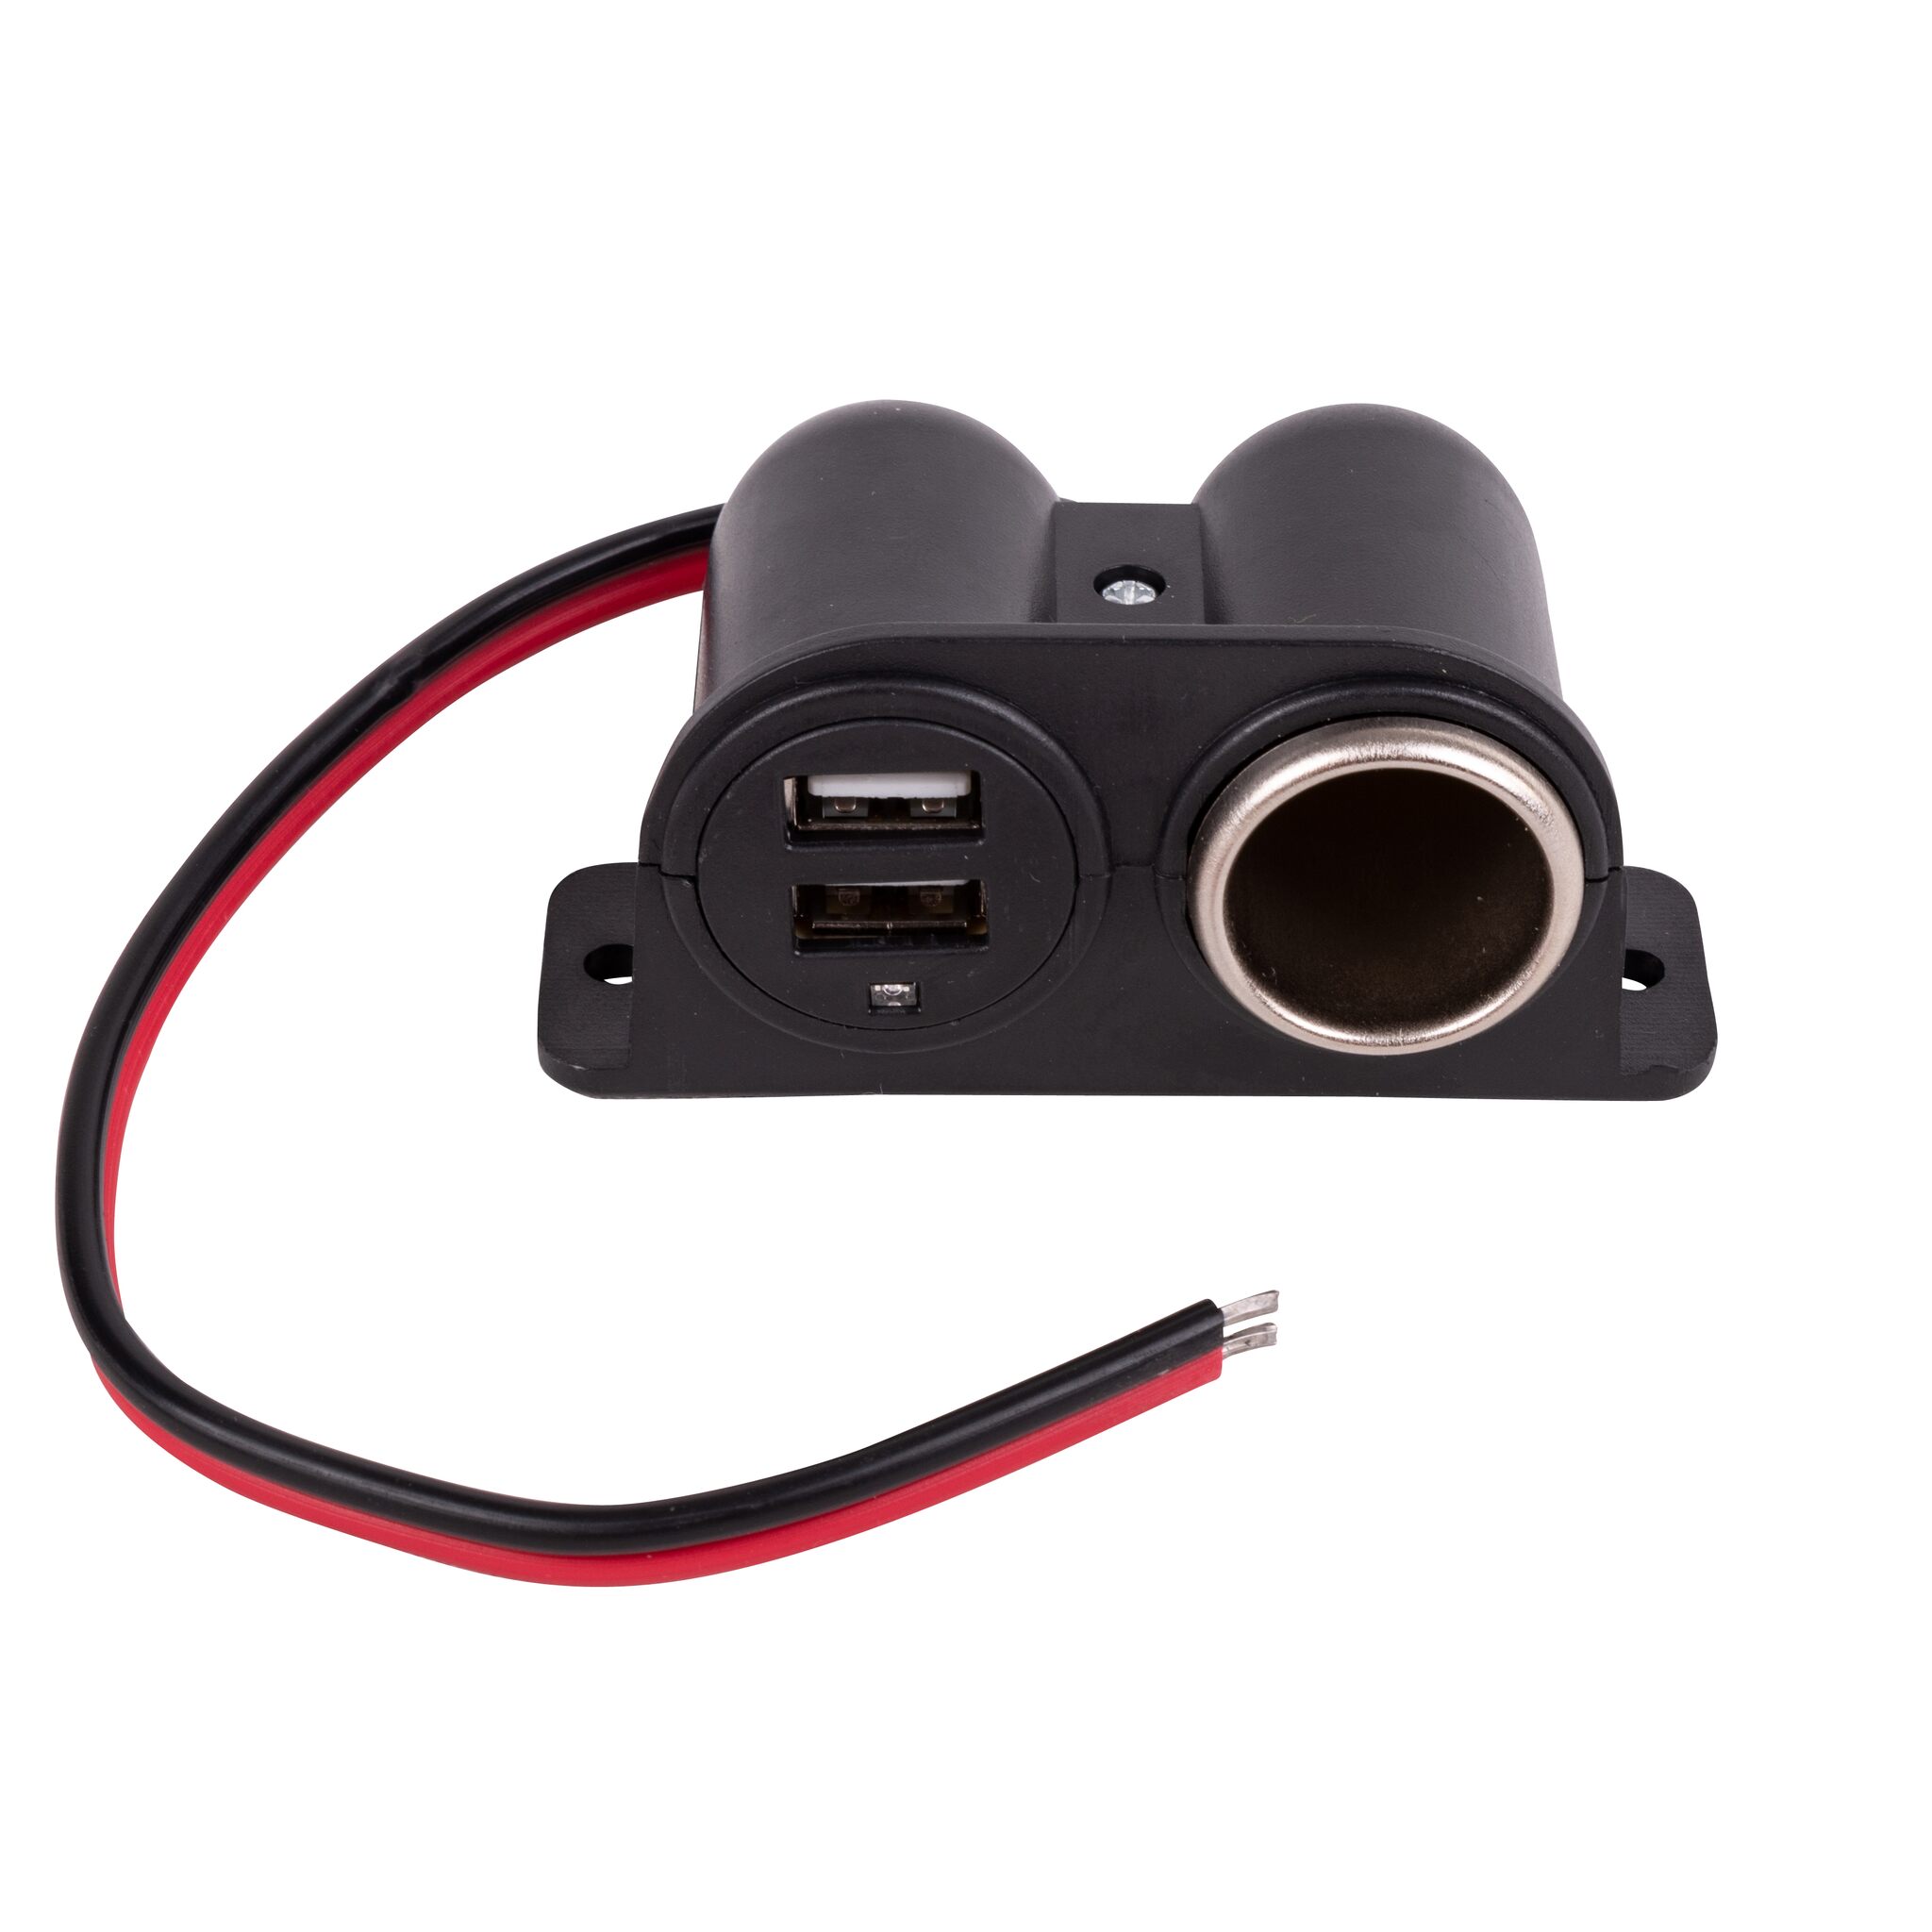 Surface mounted socket with double USB port